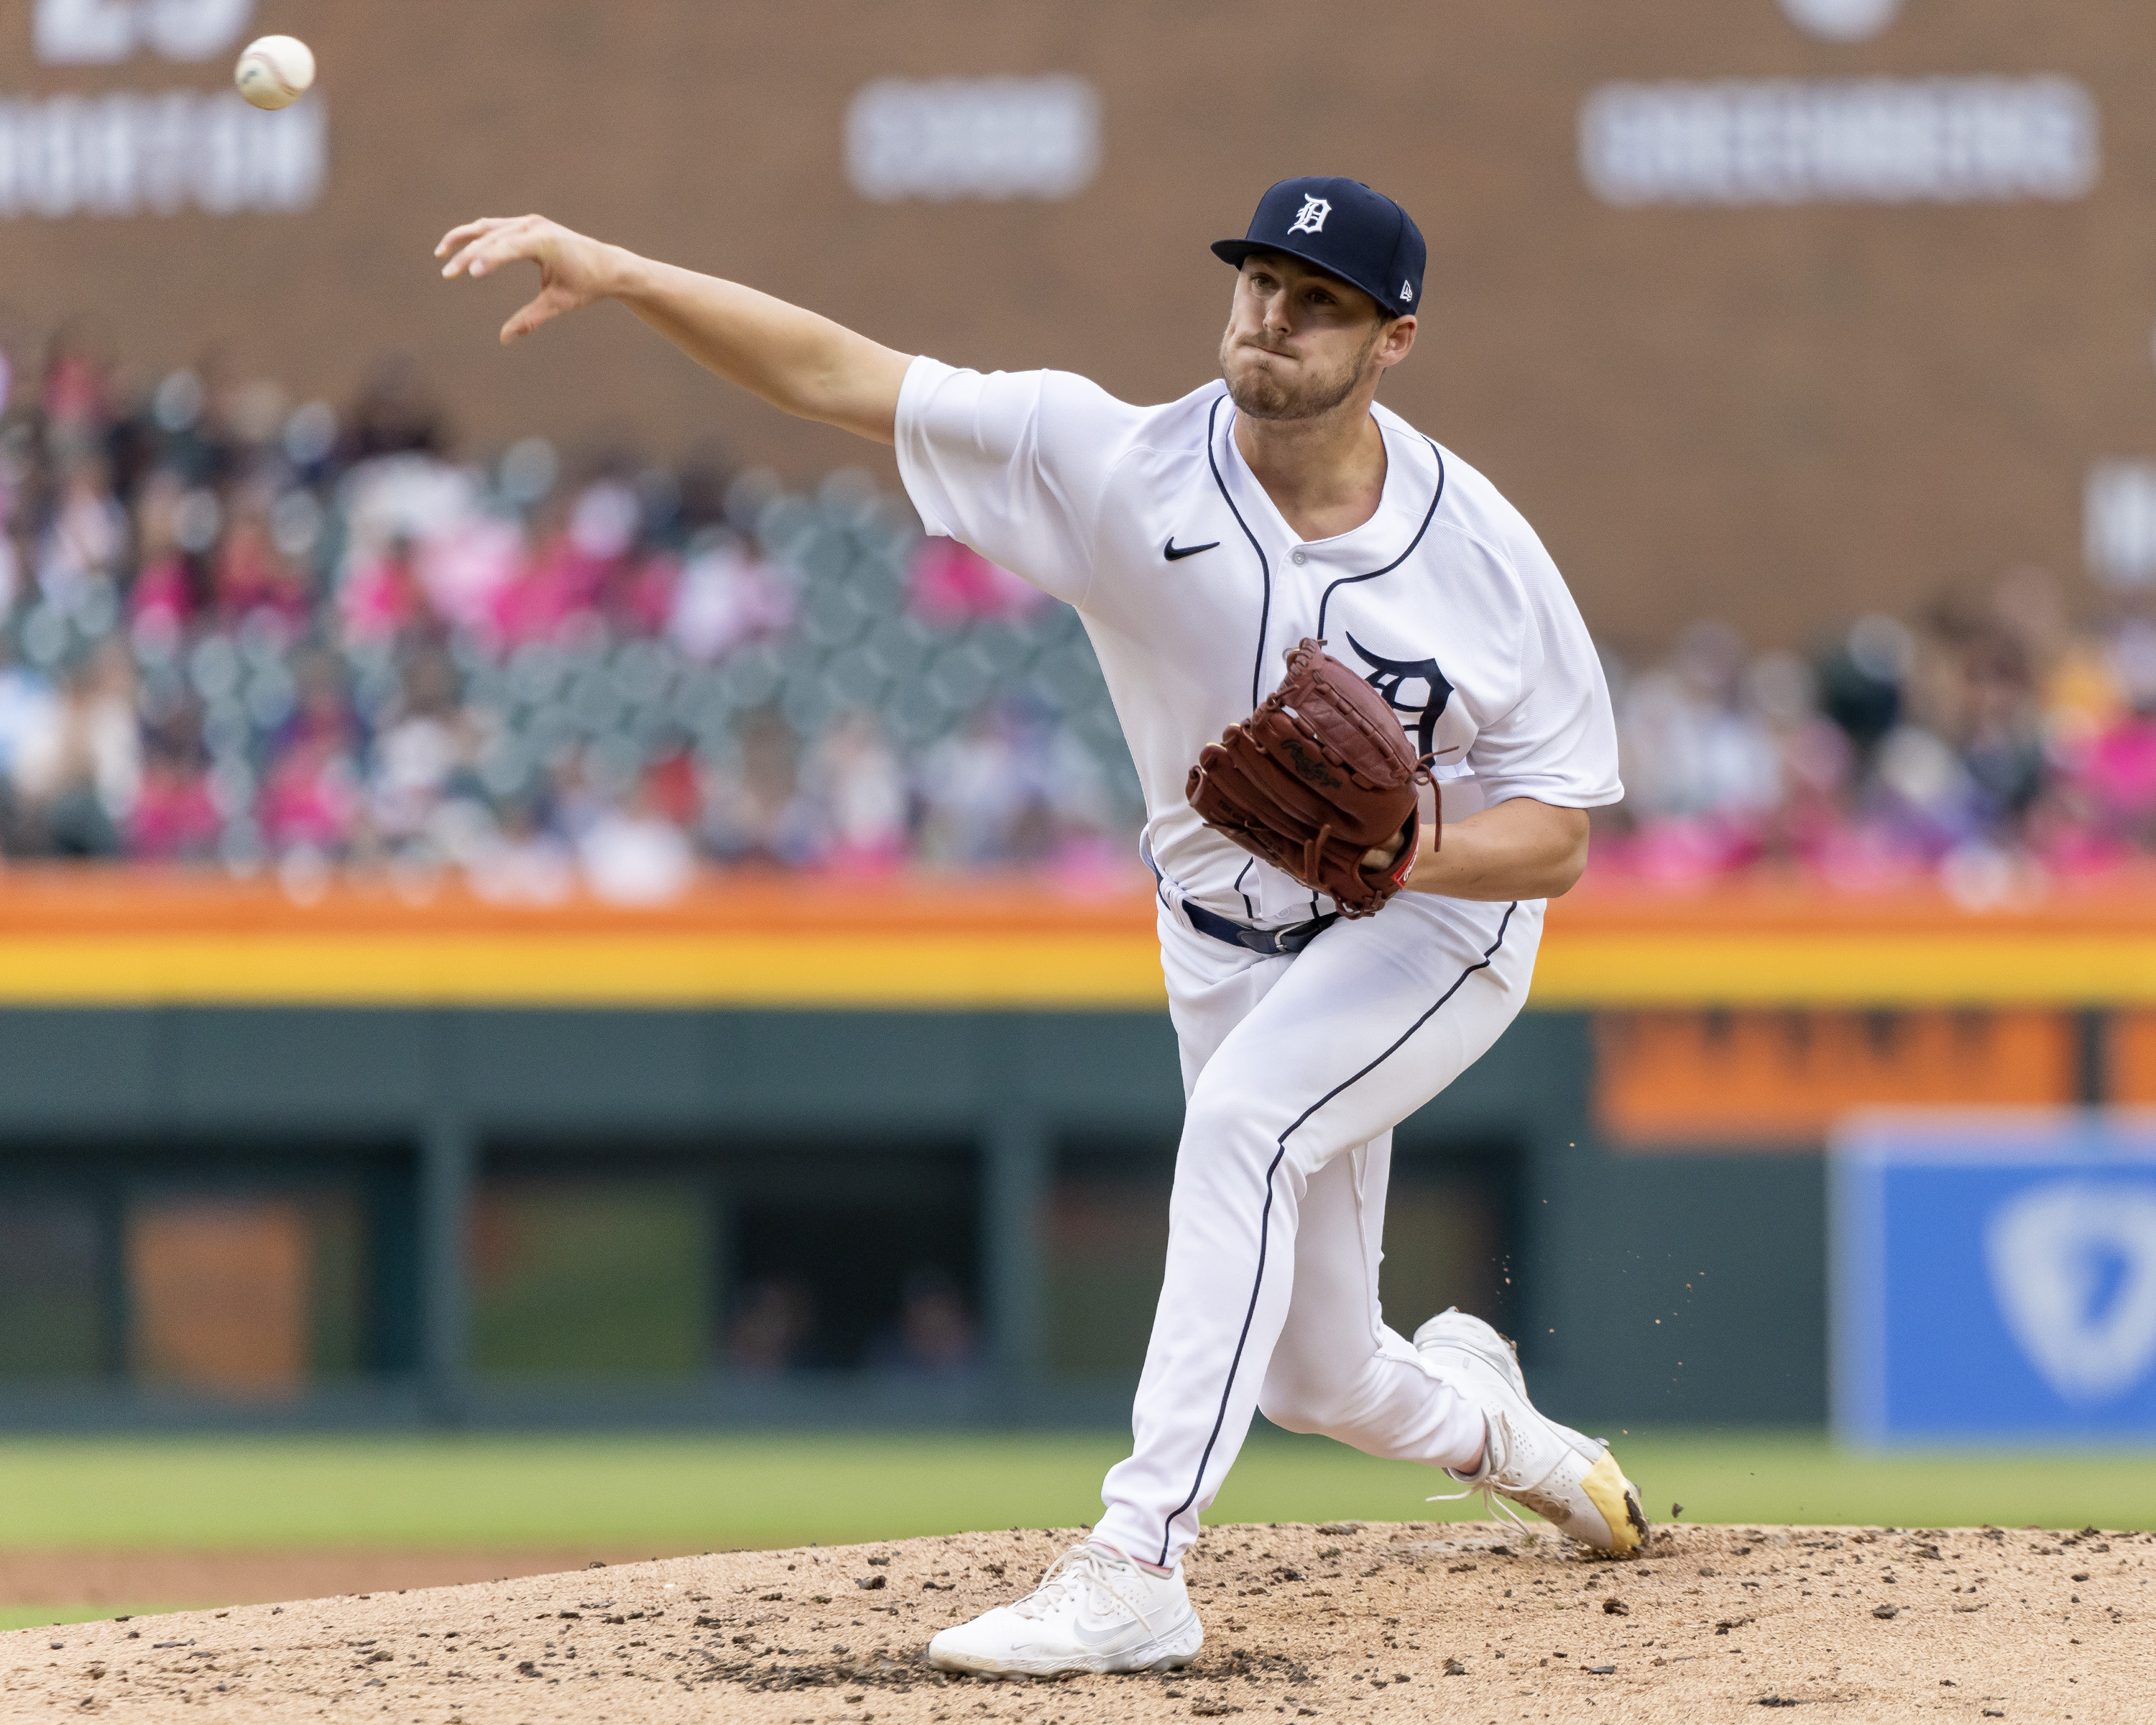 Tigers win, force Mariners to start playoffs on the road – The